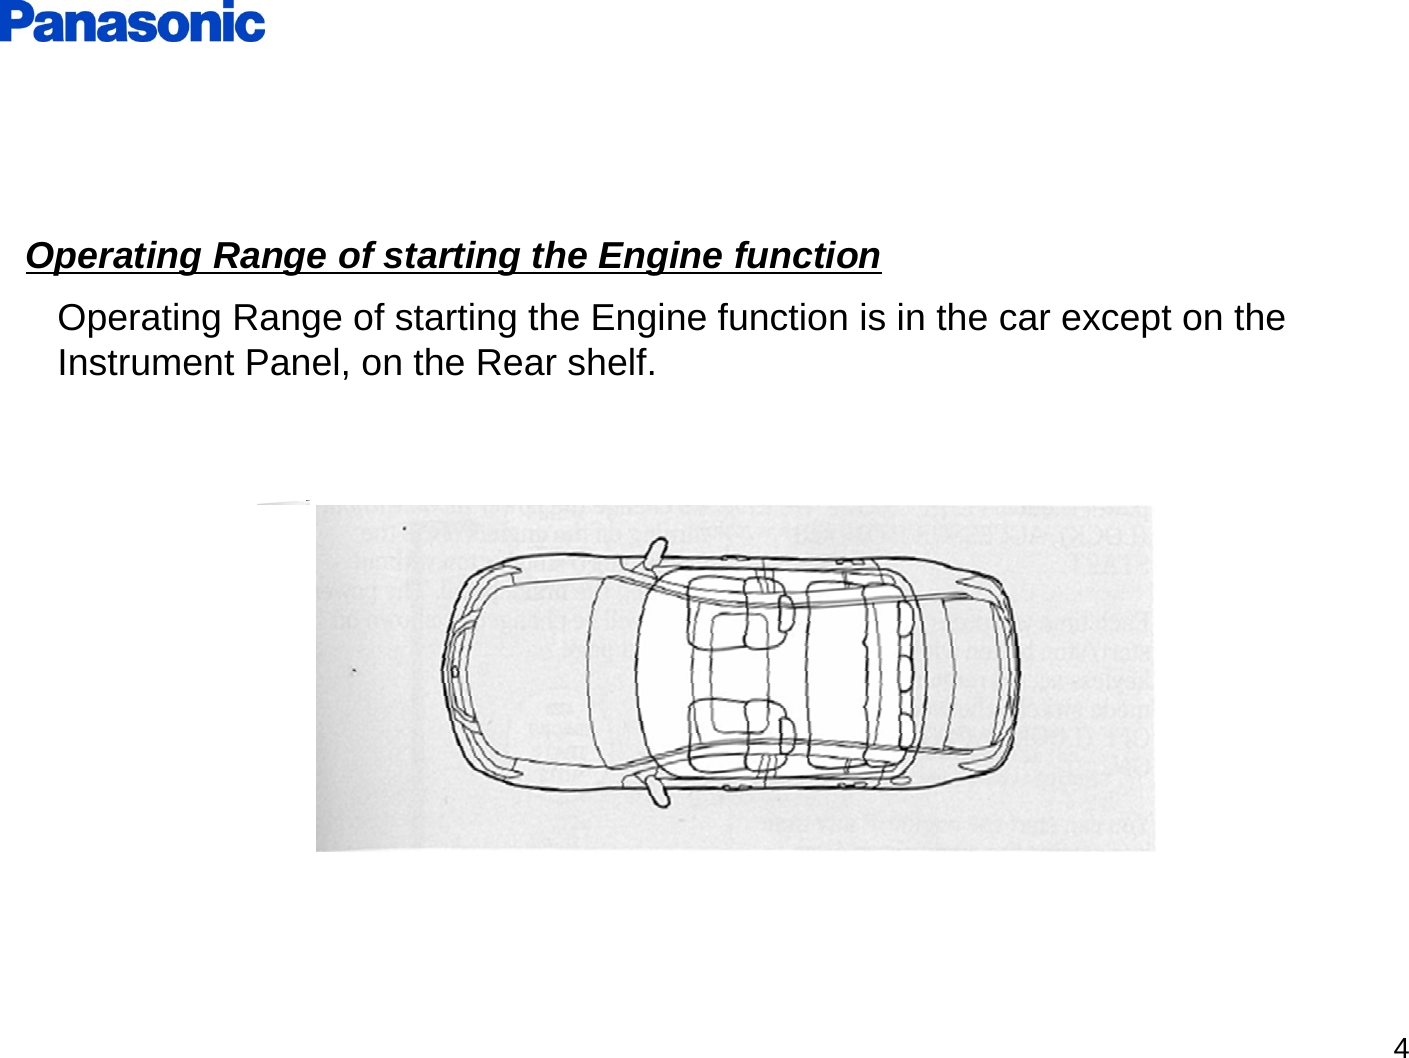 4Operating Range of starting the Engine functionOperating Range of starting the Engine function is in the car except on the Instrument Panel, on the Rear shelf.